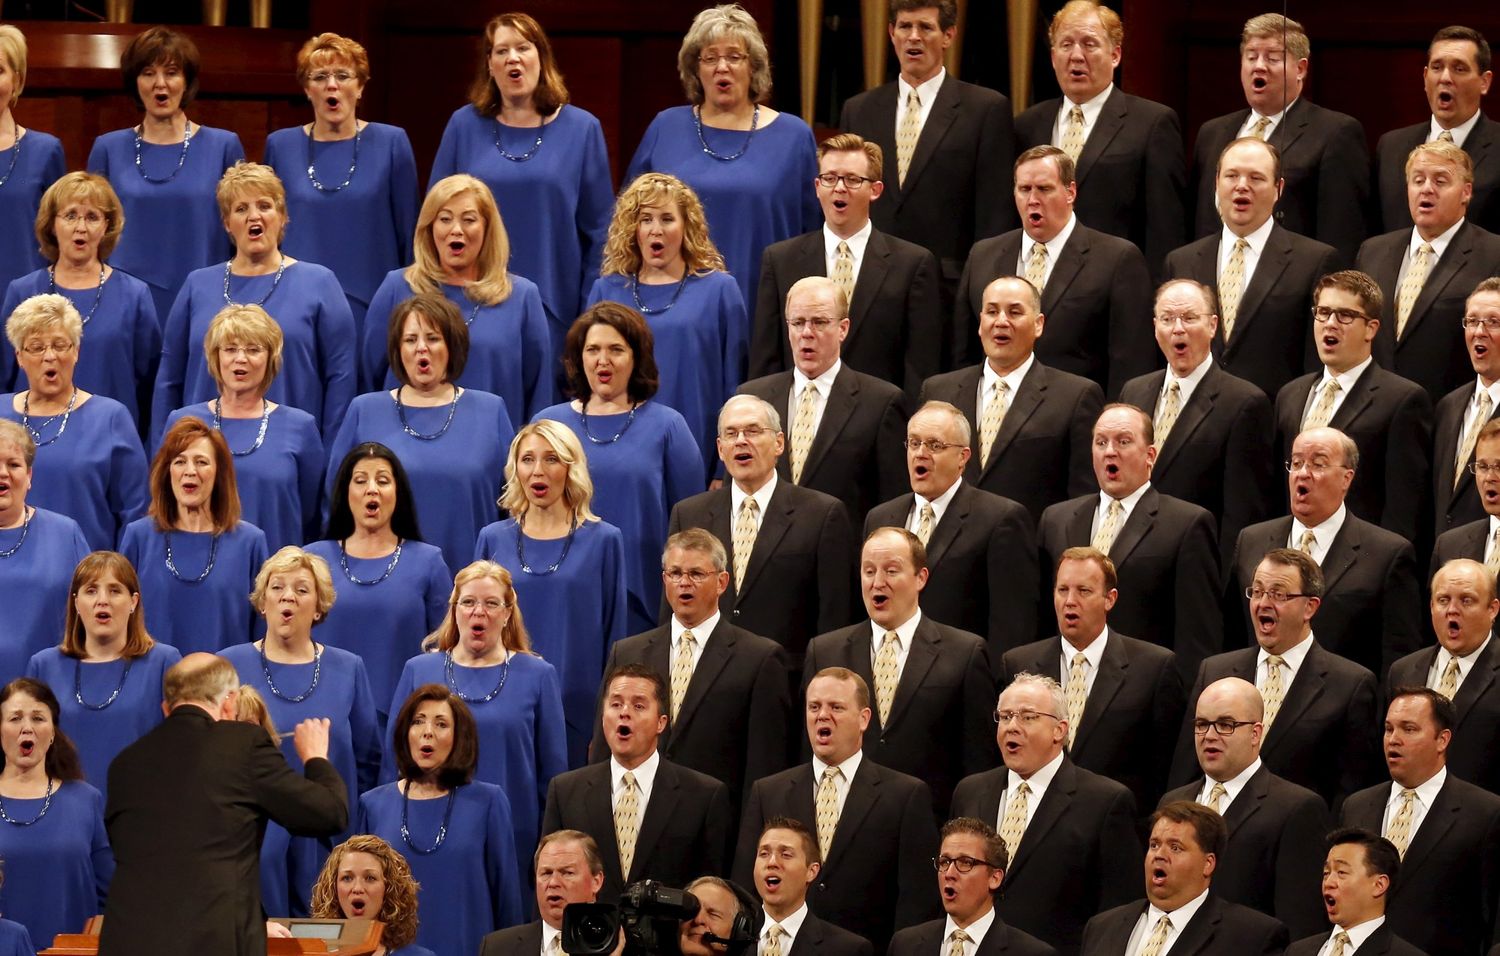 Why Can’t I Find Tickets For The Mormon Tabernacle Choir